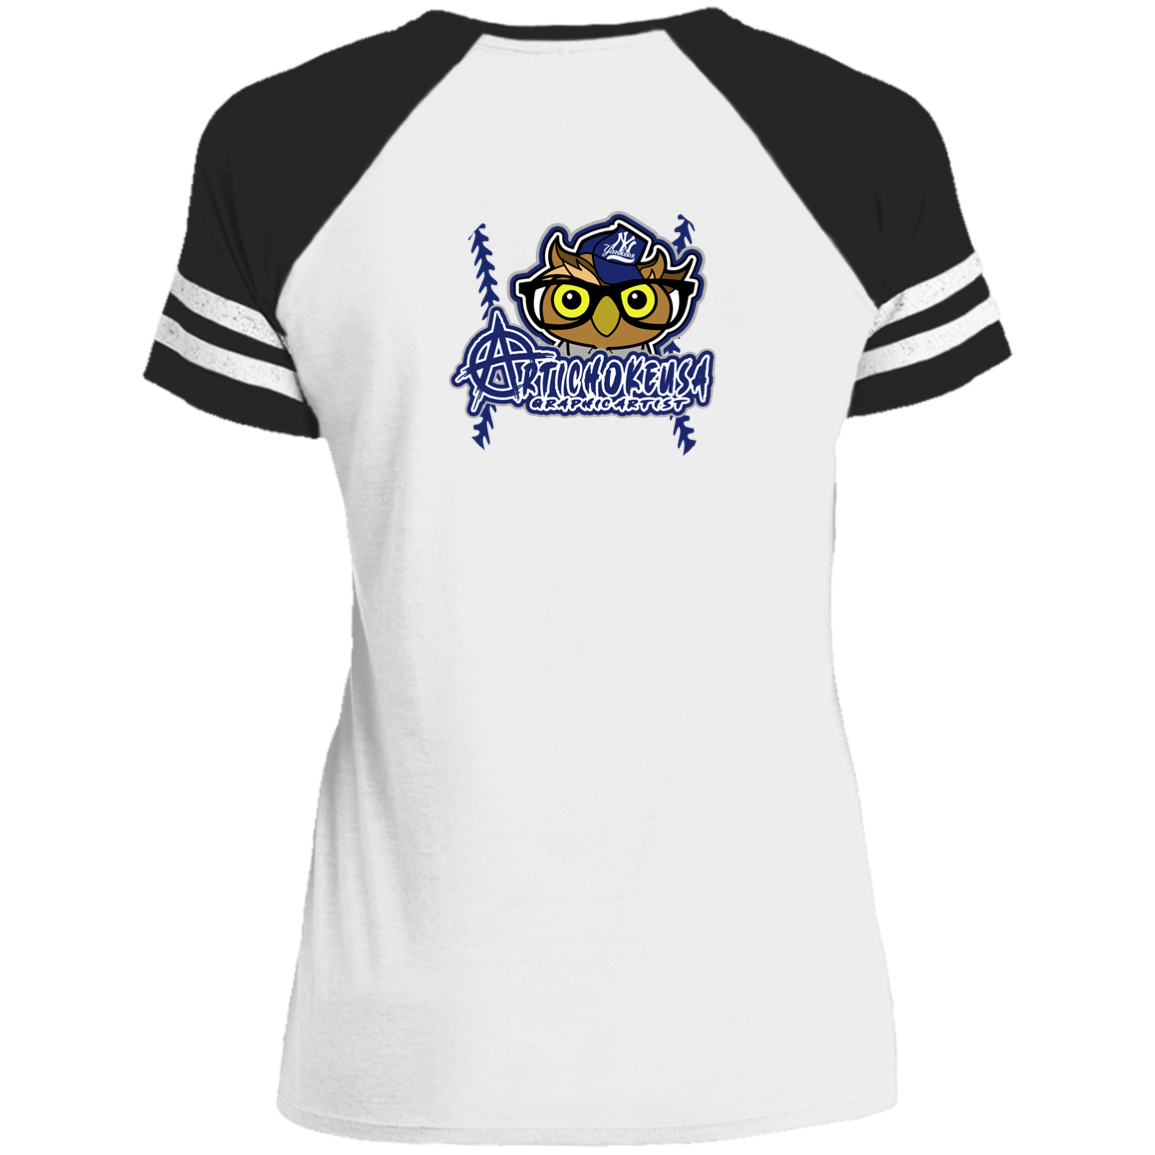 ArtichokeUSA Character and Font design. New York Owl. NY Yankees Fan Art. Let's Create Your Own Team Design Today. Ladies' Game V-Neck T-Shirt